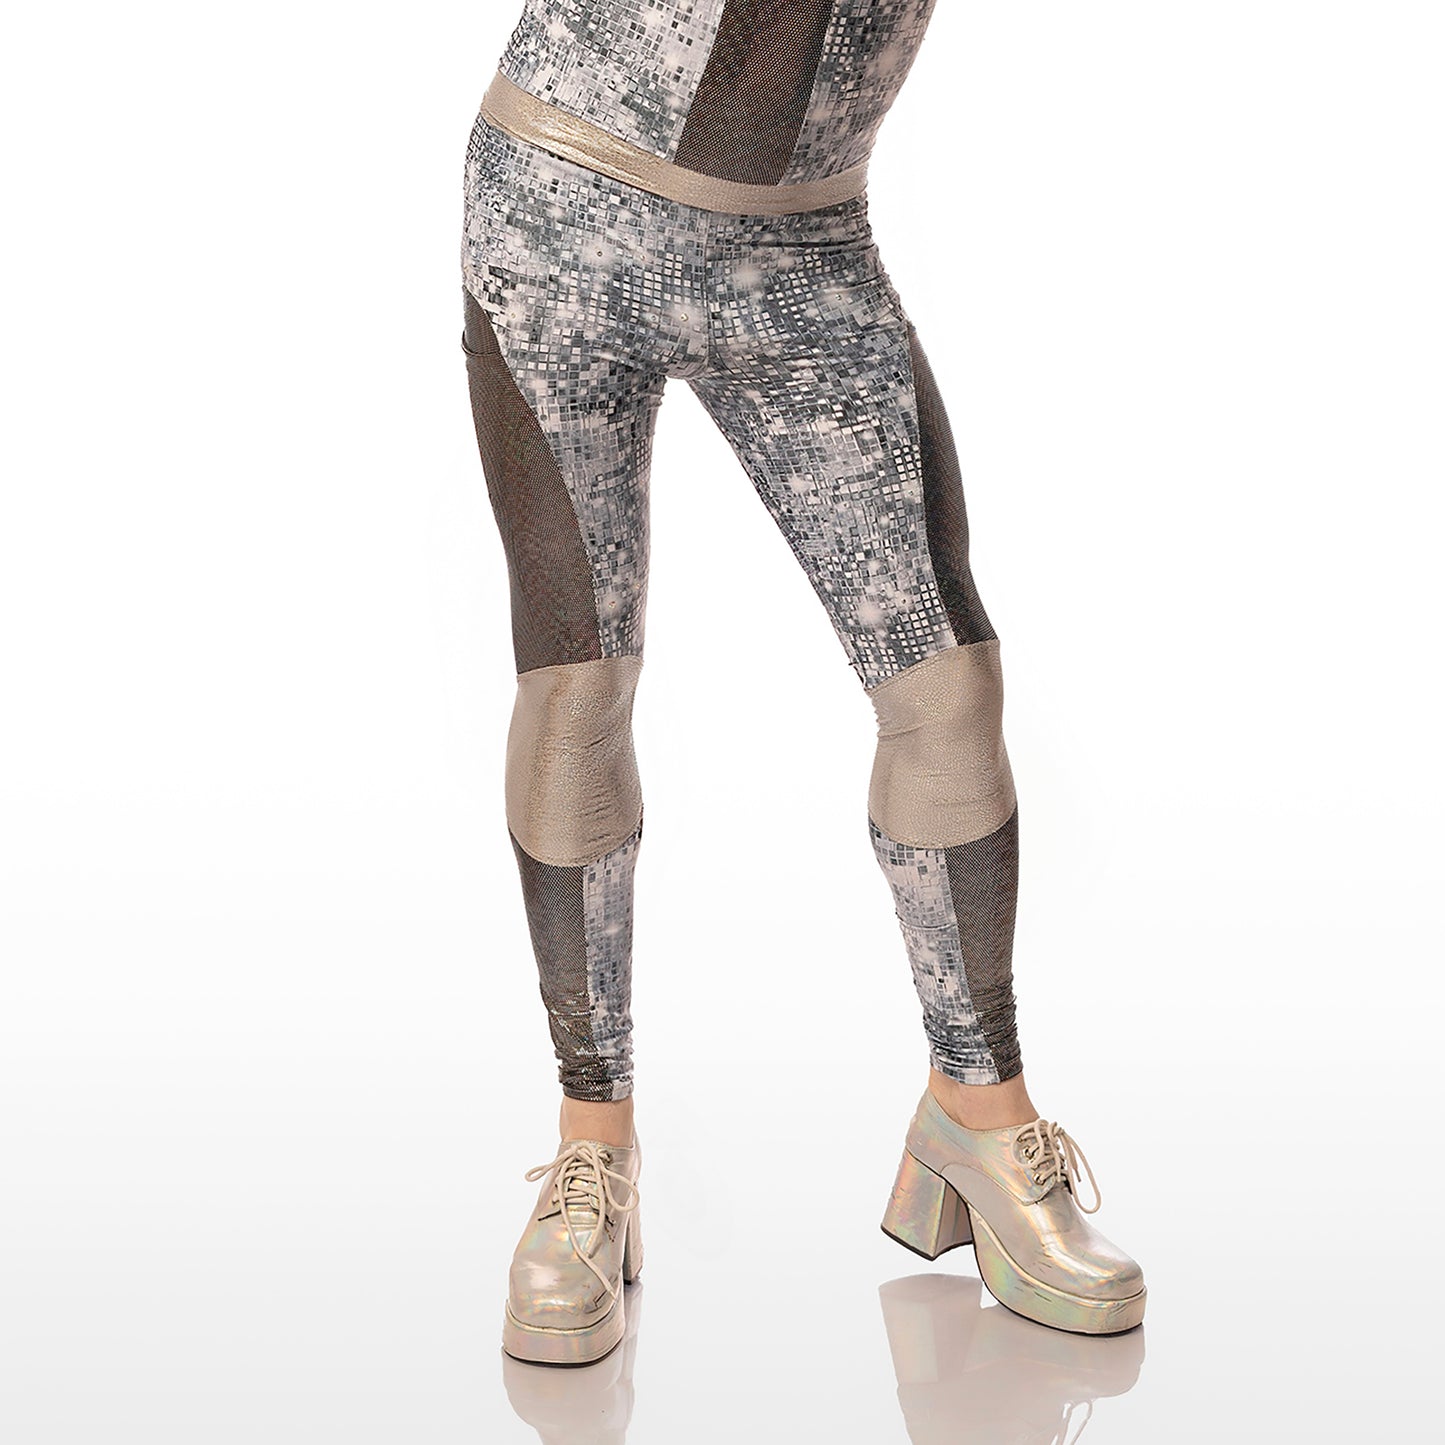 Disco Diva Leggings, a handmade-to-order piece in disco ball and silver foil print spandex. The leggings feature a double layer high waist with light silver knee panels and granite foil curved leg panels. Model Max stands facing the camera. The image is cropped to show just the legs. 